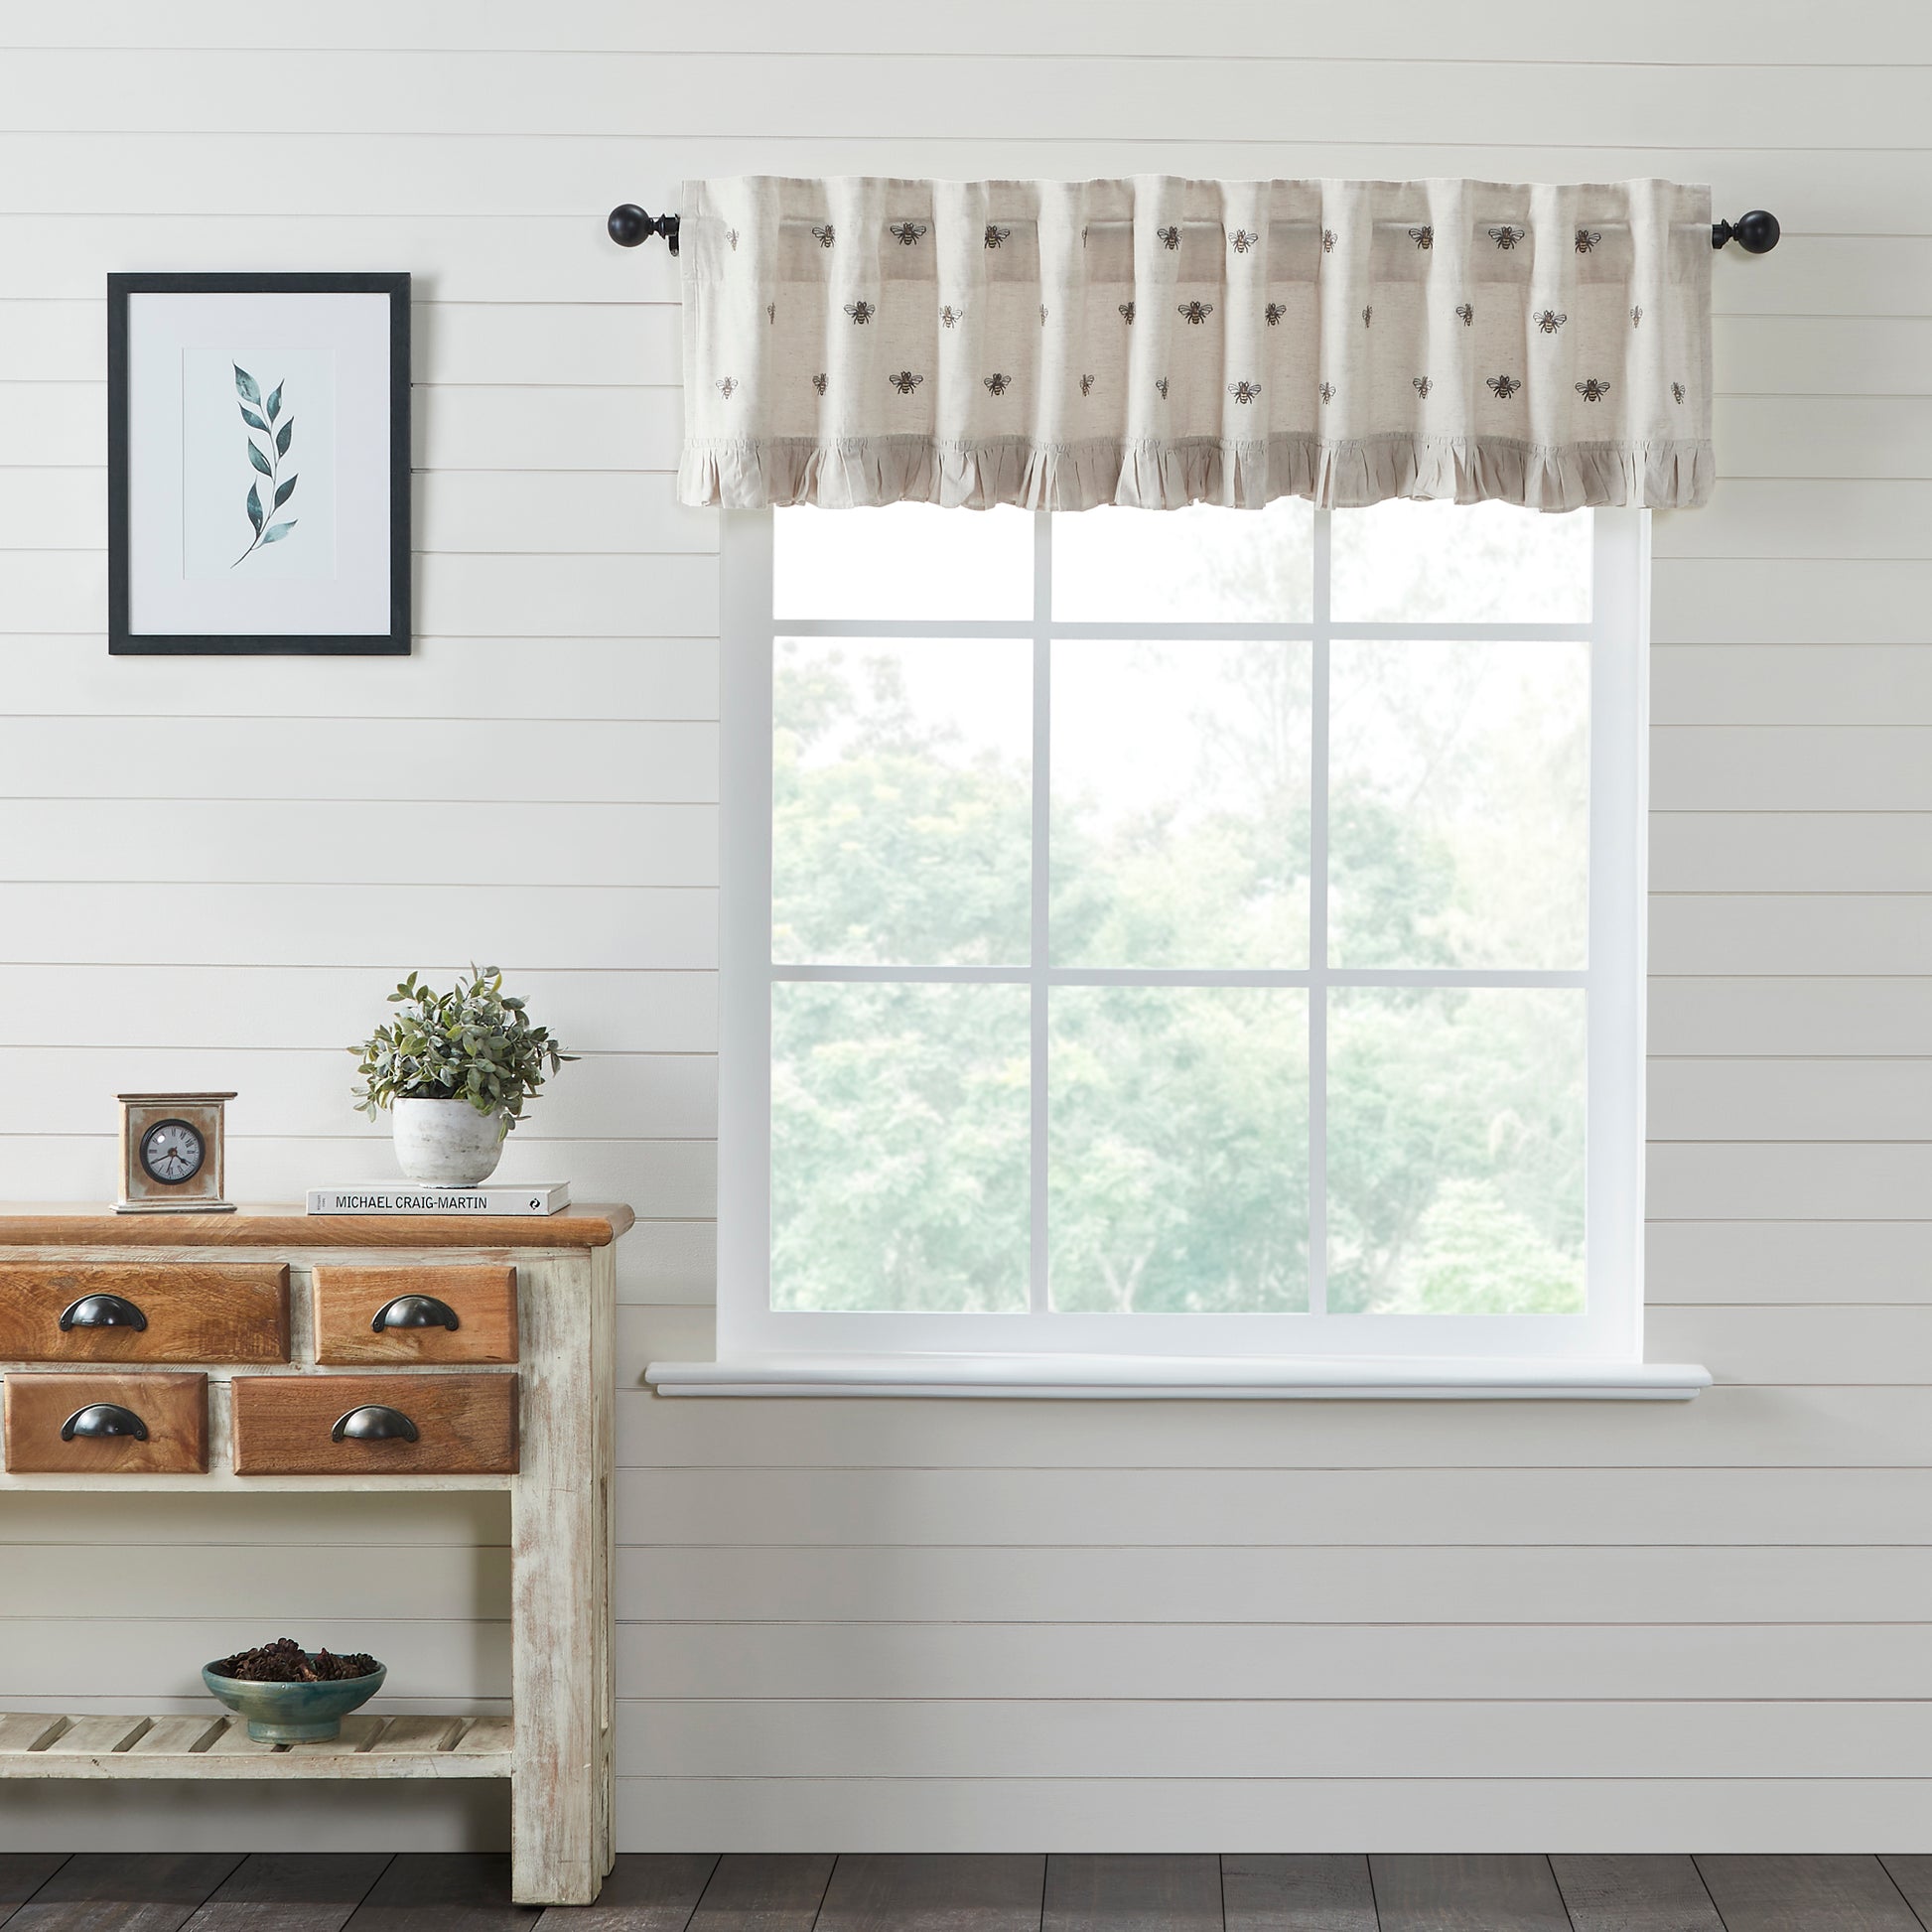 81265-Embroidered-Bee-Valance-16x90-image-6